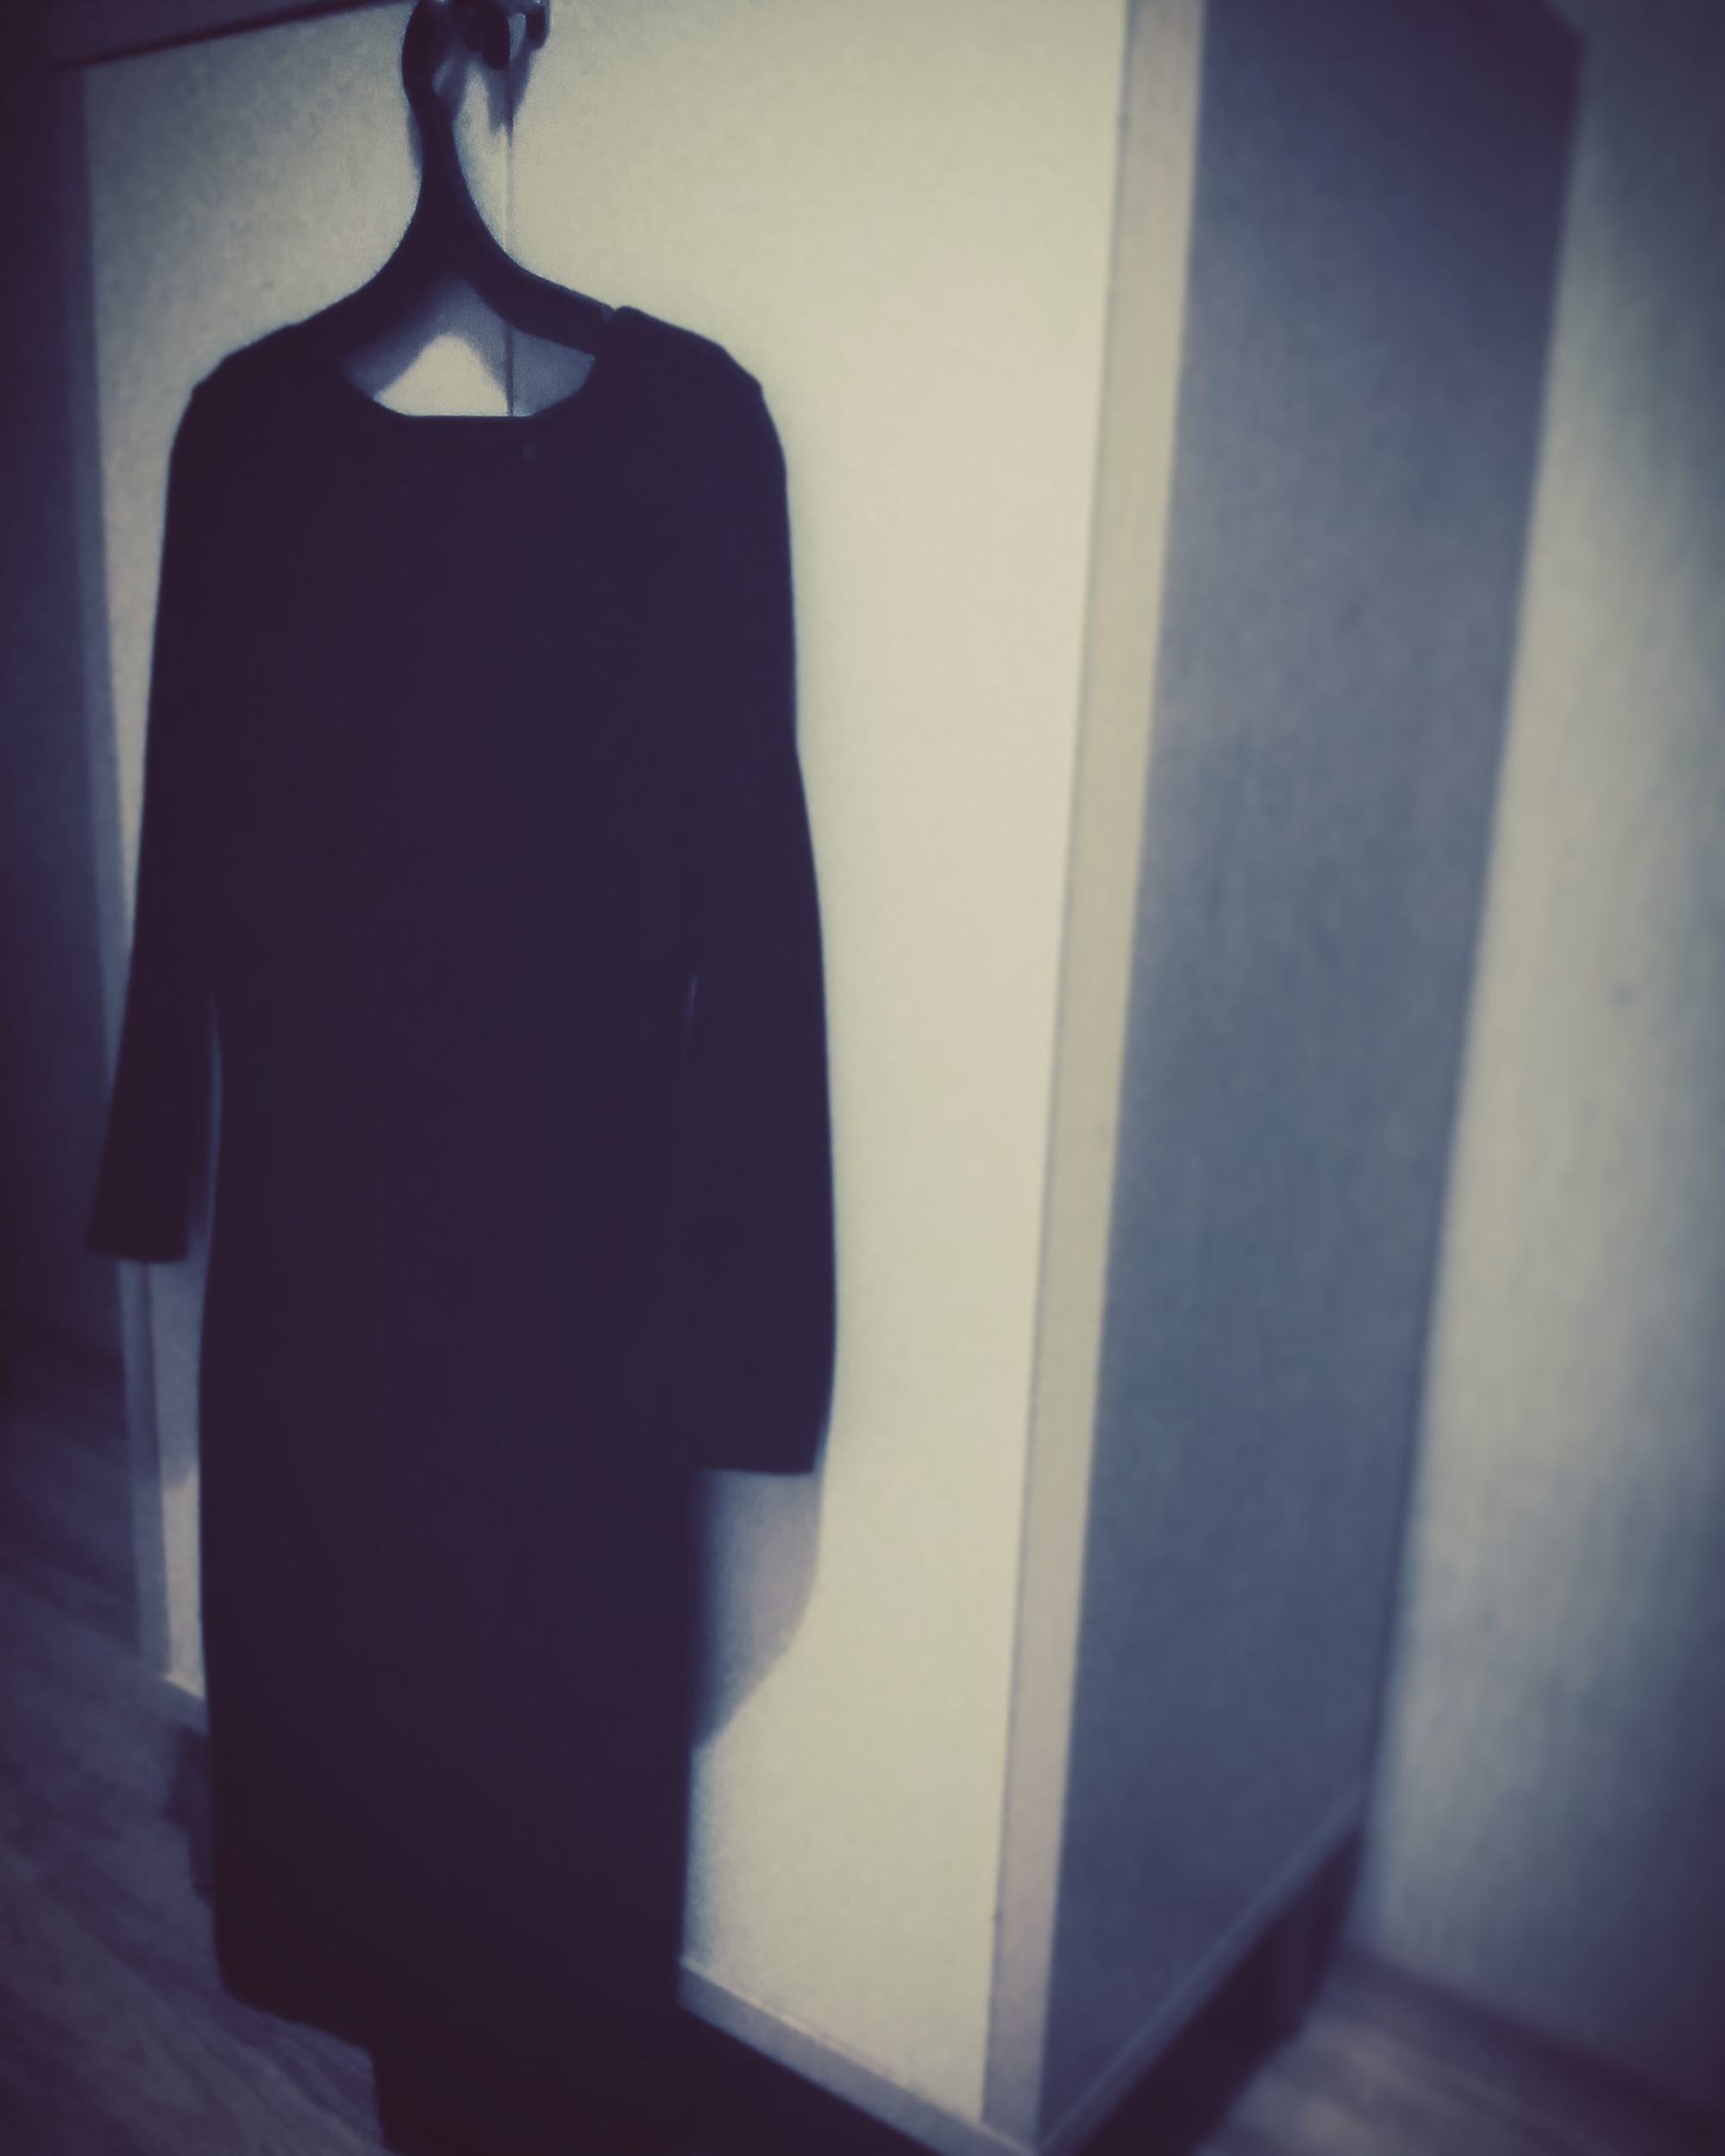 Photo of dress hanging on a wall